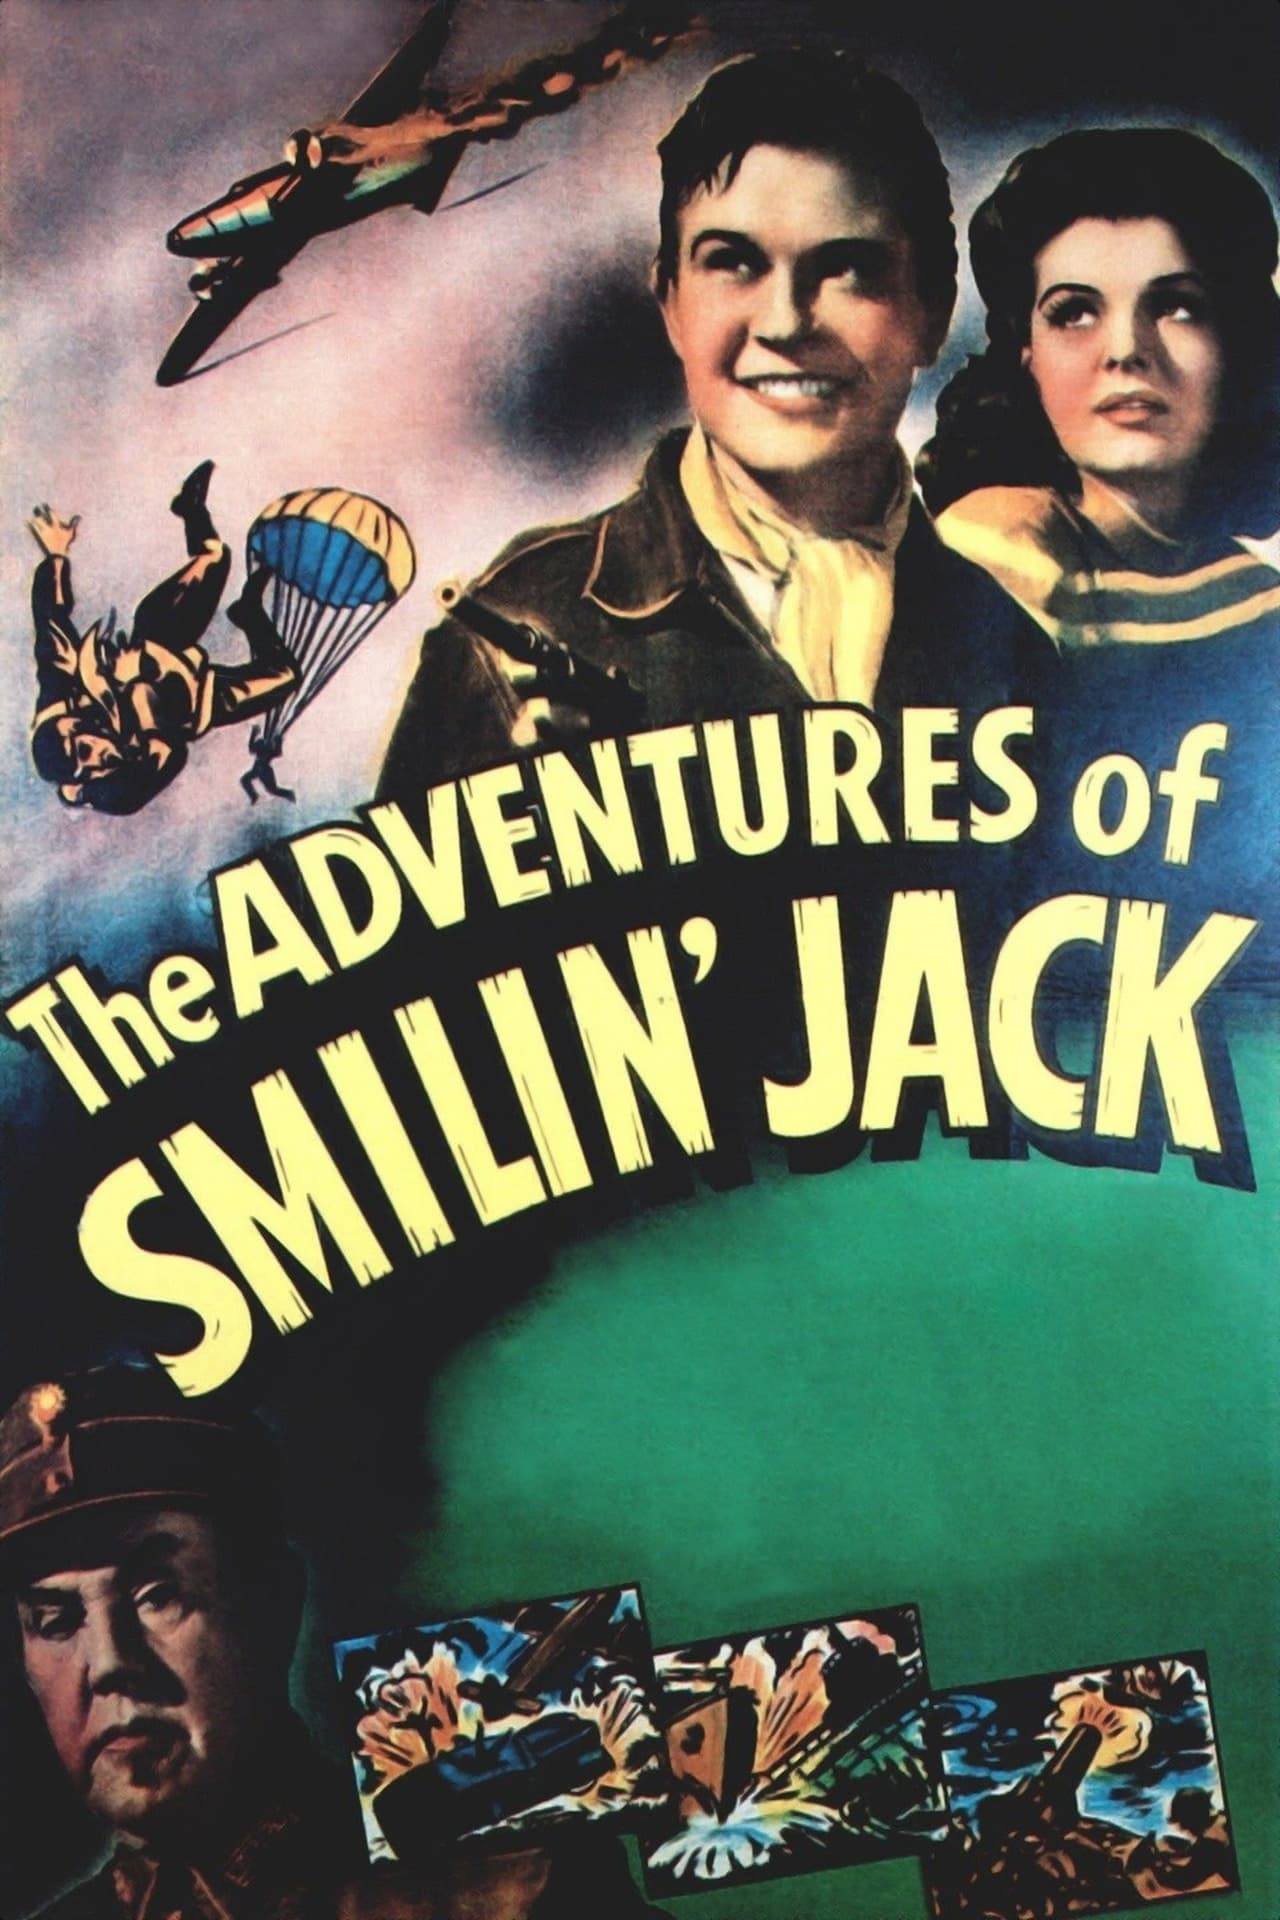 The Adventures of Smilin’ Jack